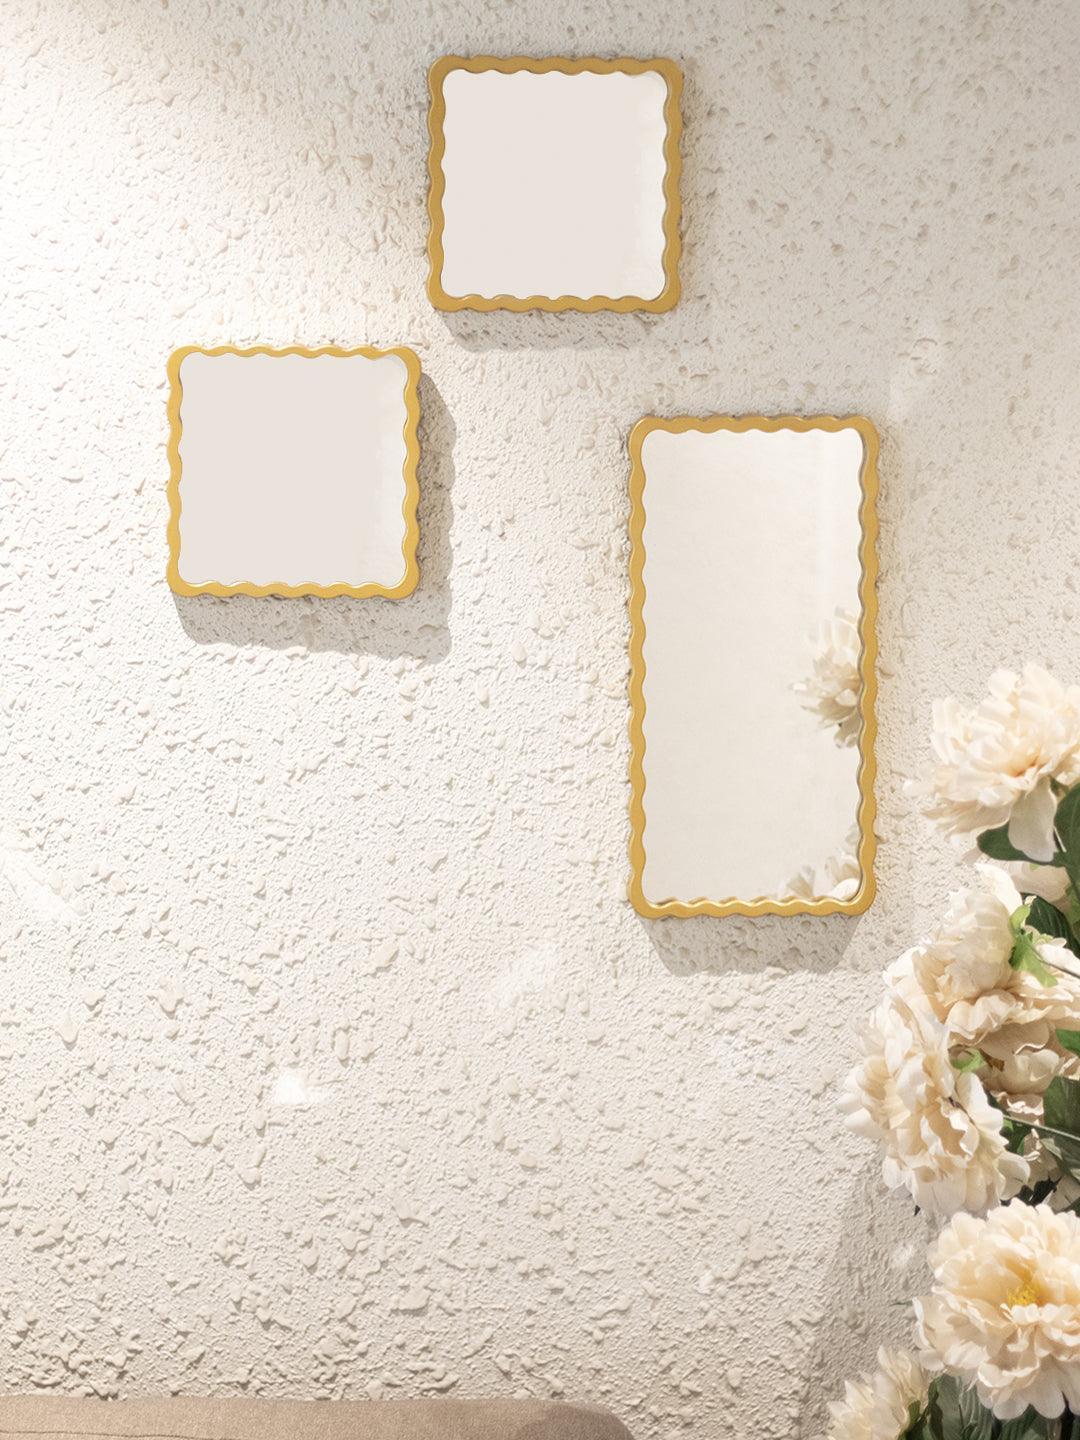 Decorative Wall Mirrors For Home Decoration (Set of 3 Mirrors) - MARKET 99